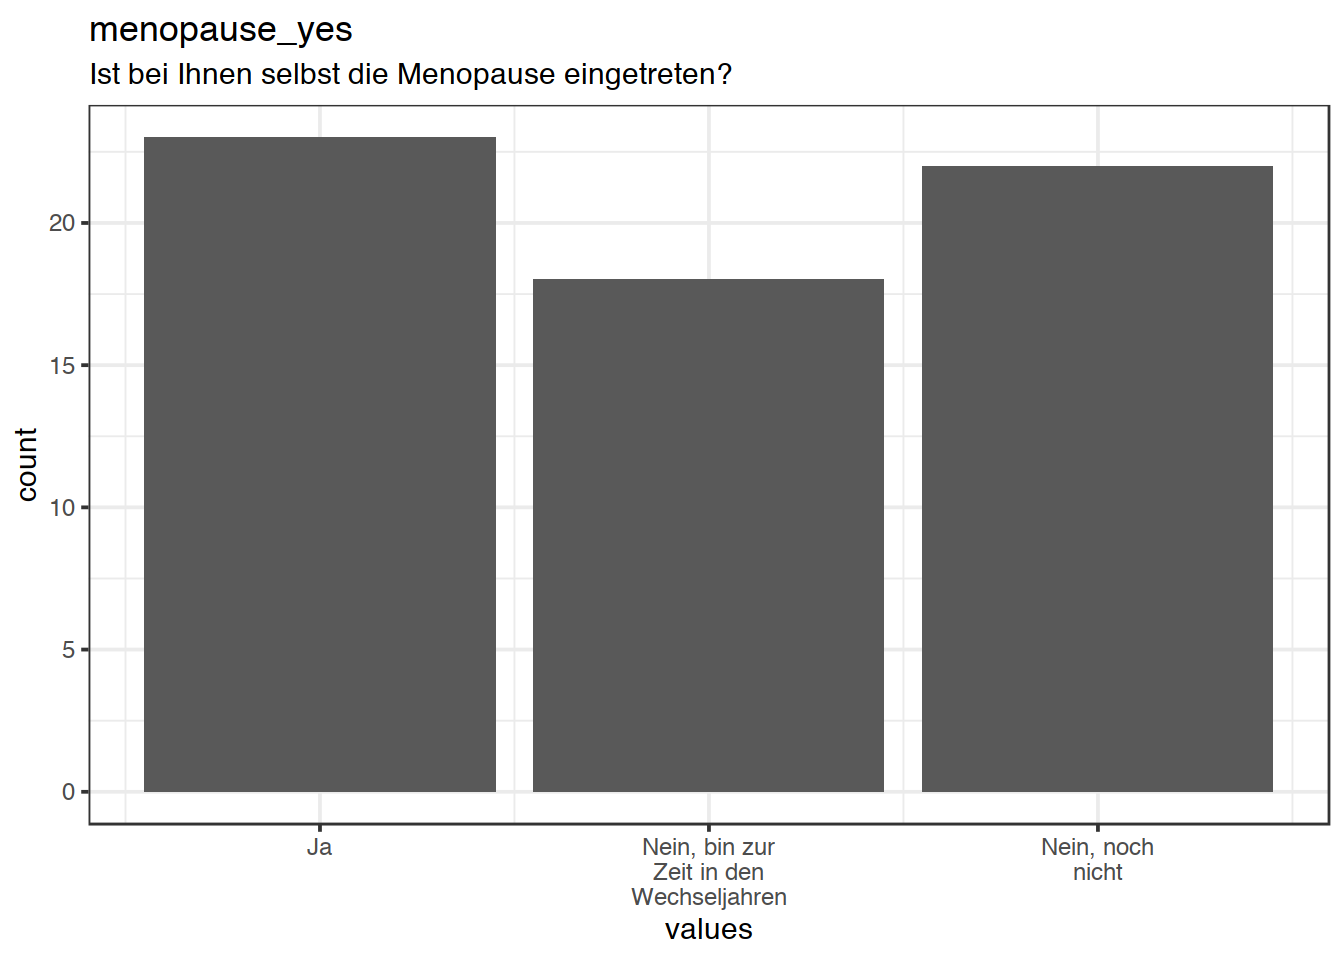 Distribution of values for menopause_yes